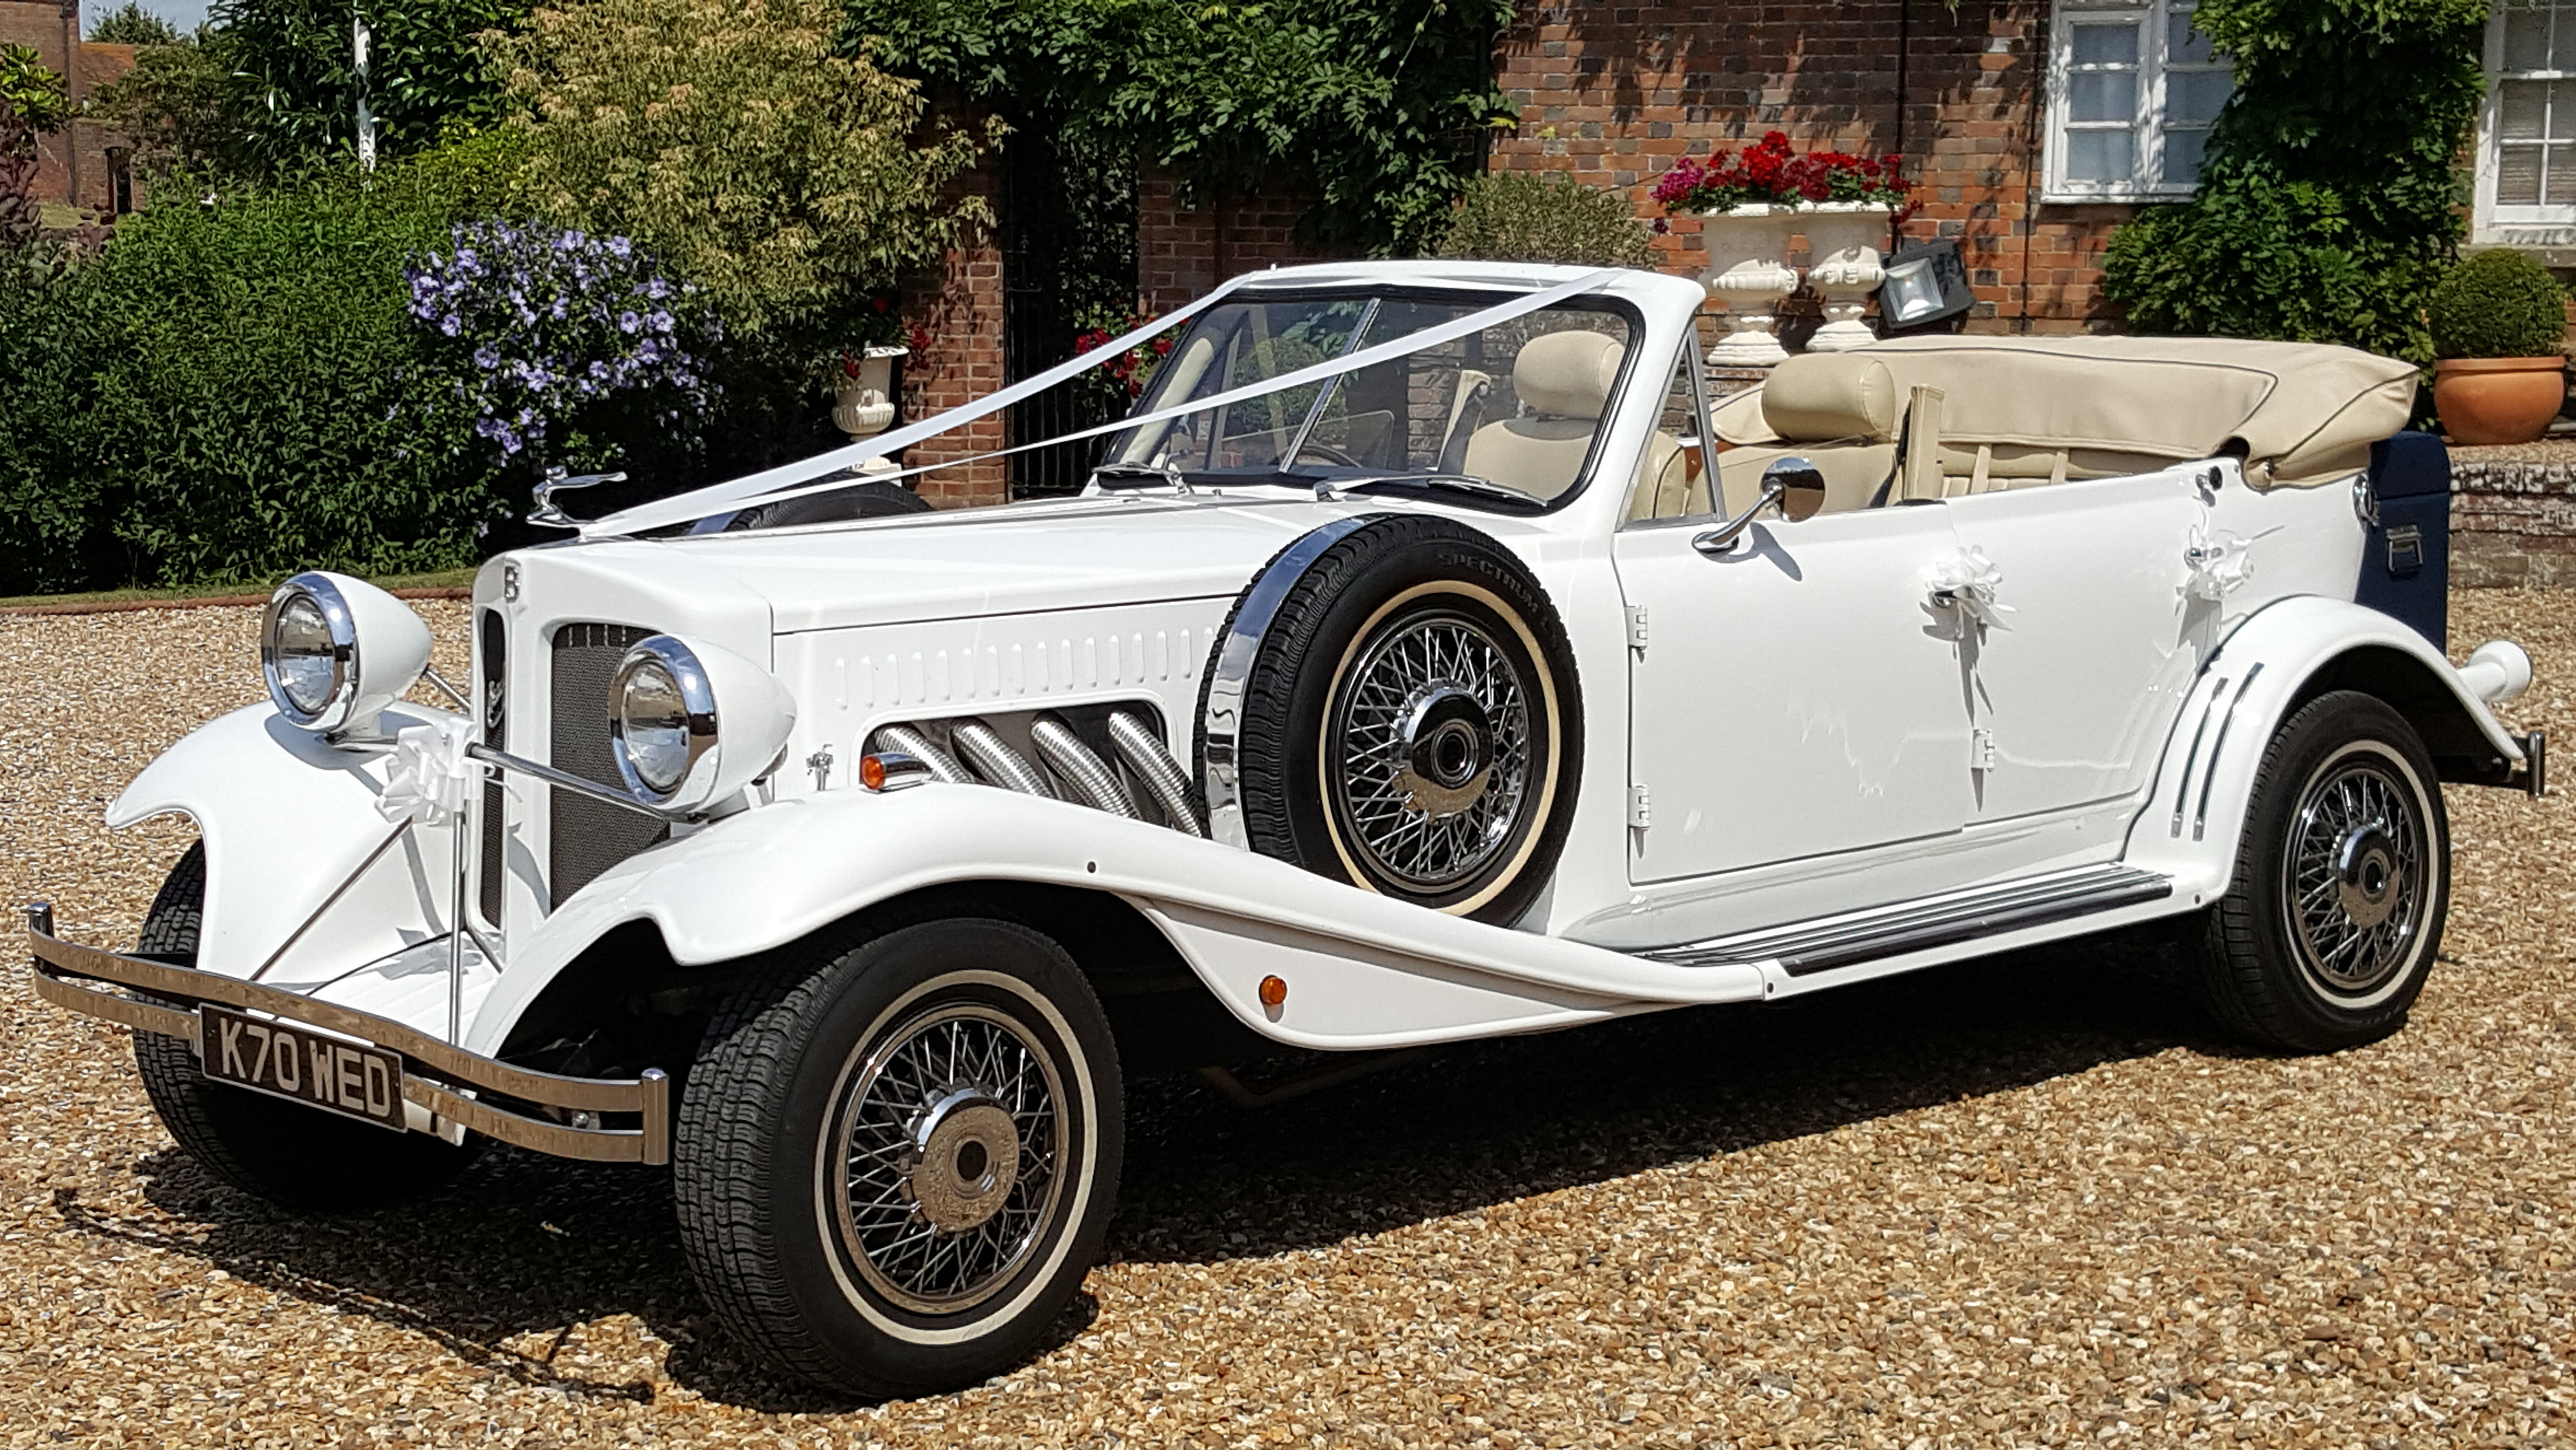 Beauford 4 Door Convertible wedding car for hire in Gloucester, Gloucestershire